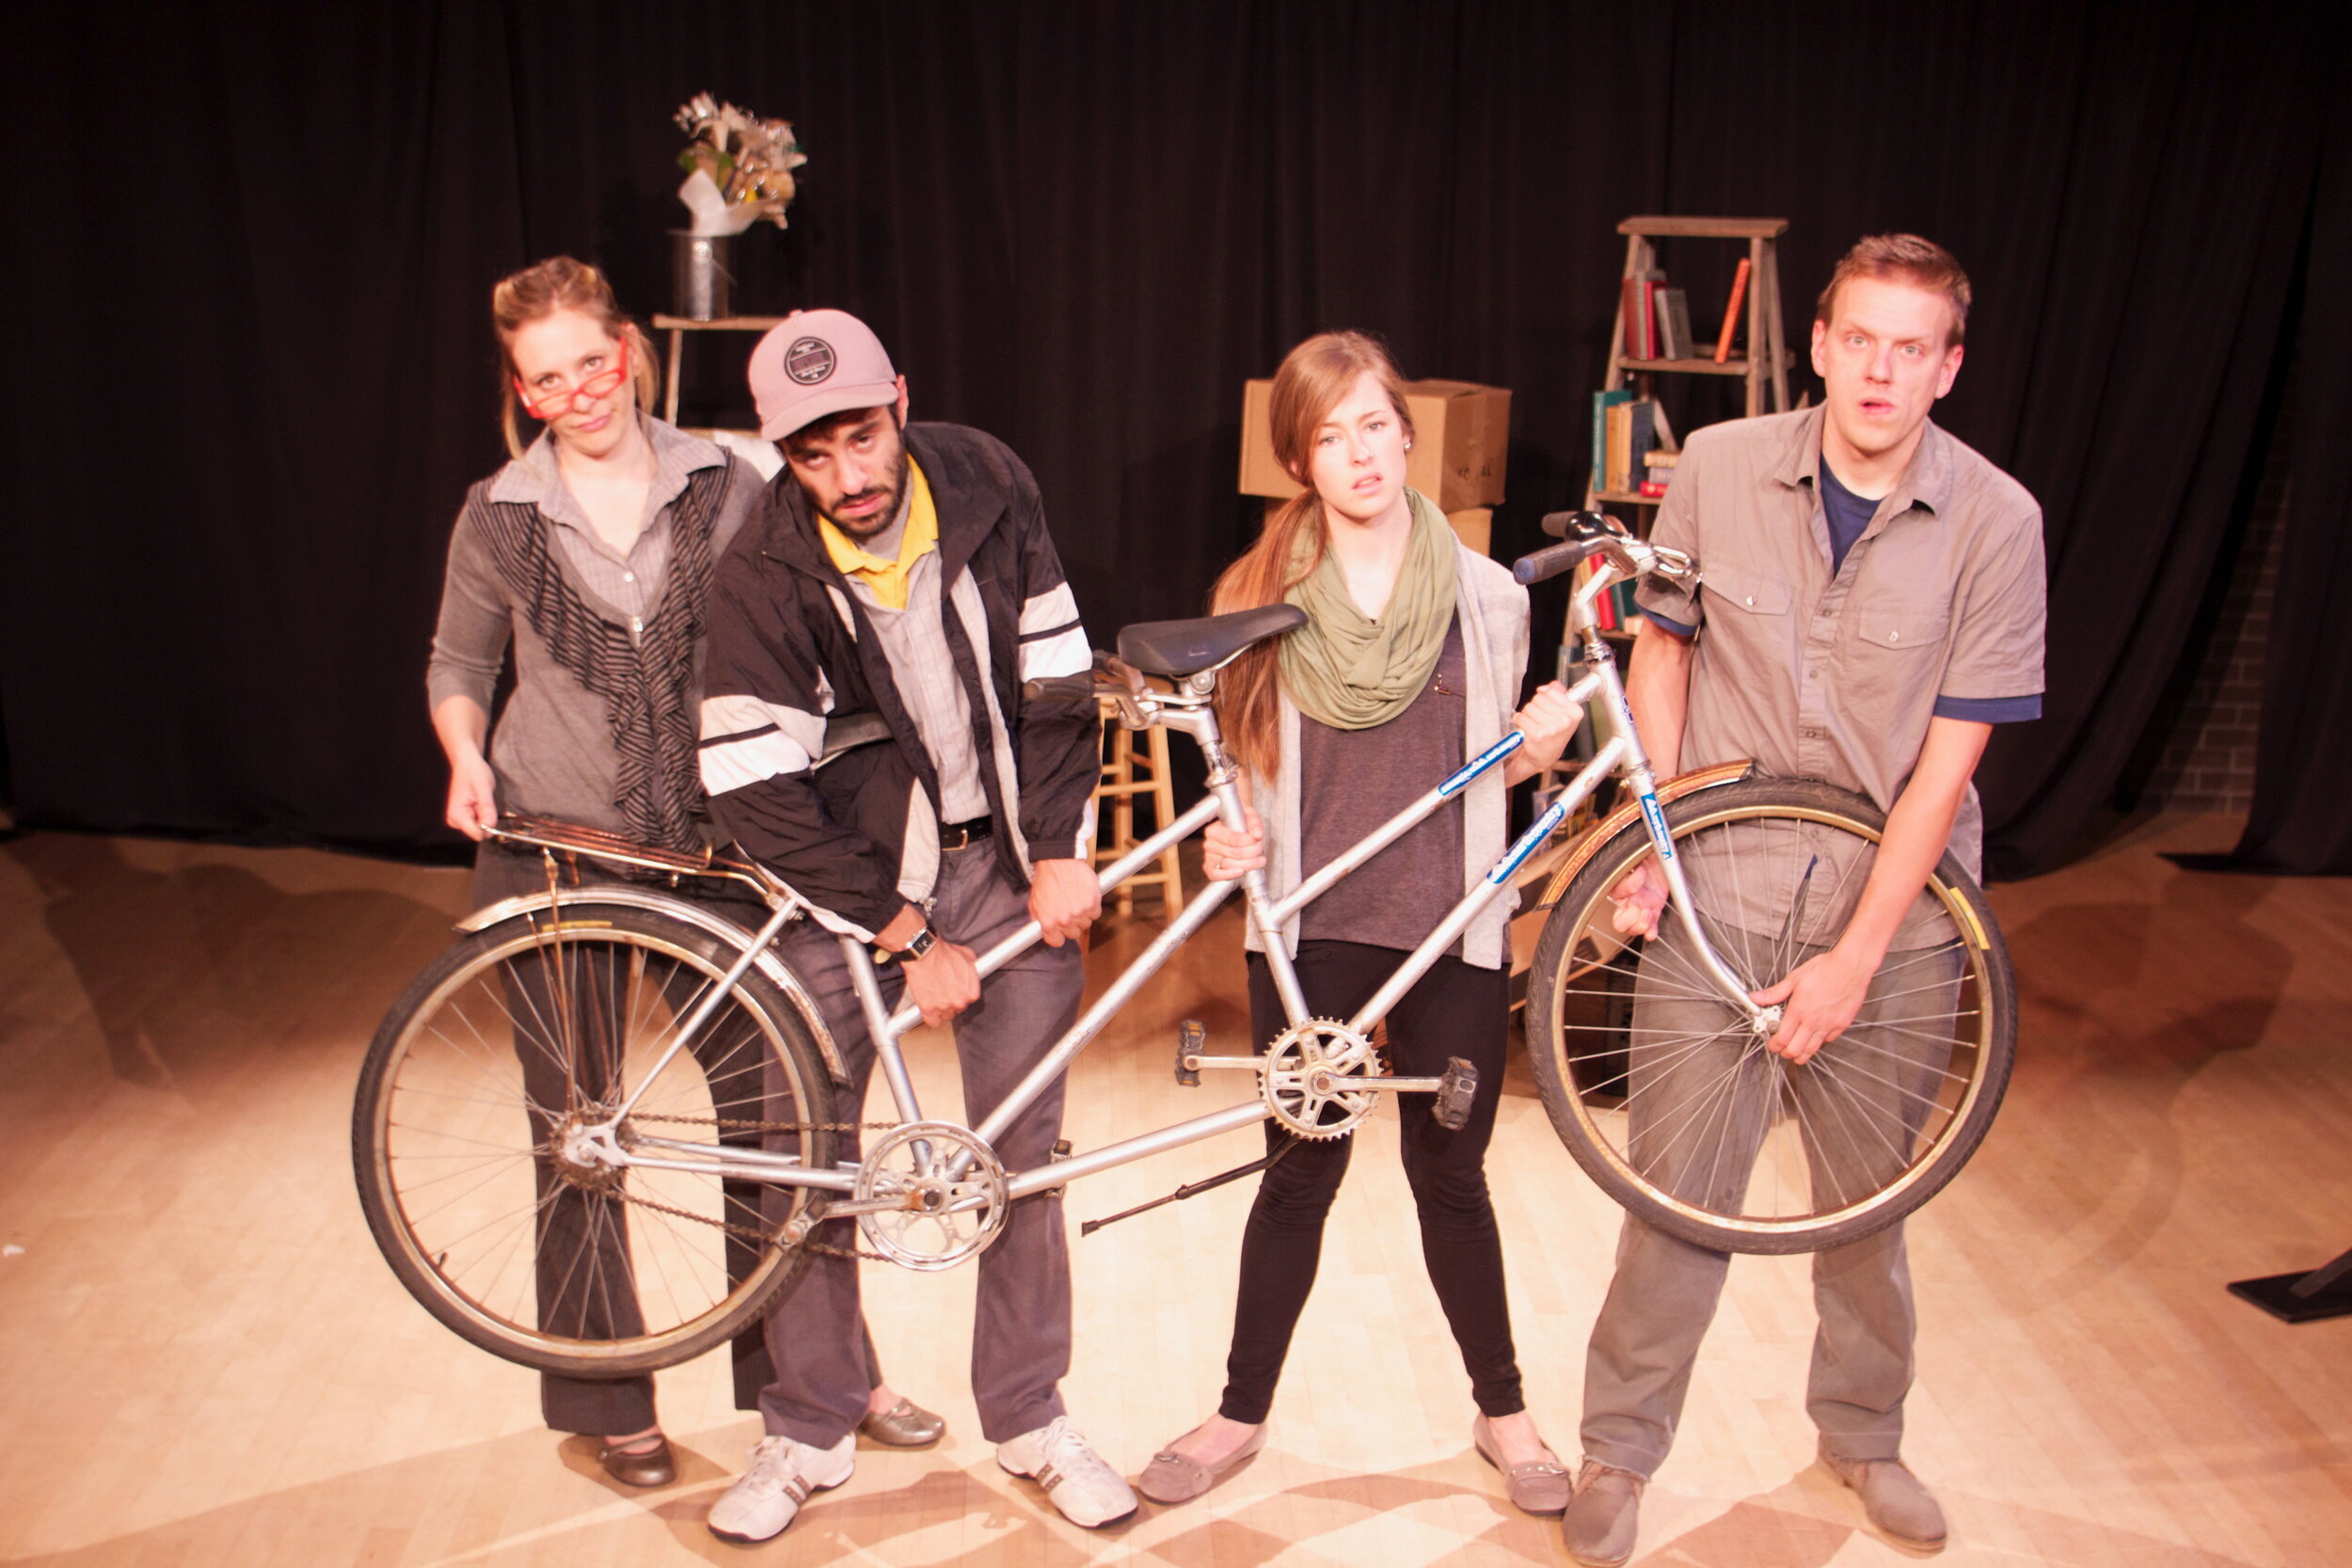  The cast of Bicycle Built for Two - Anna-Laure Koop, Benjamin Wert, Rebecca Steiner, and Johnny Wideman 